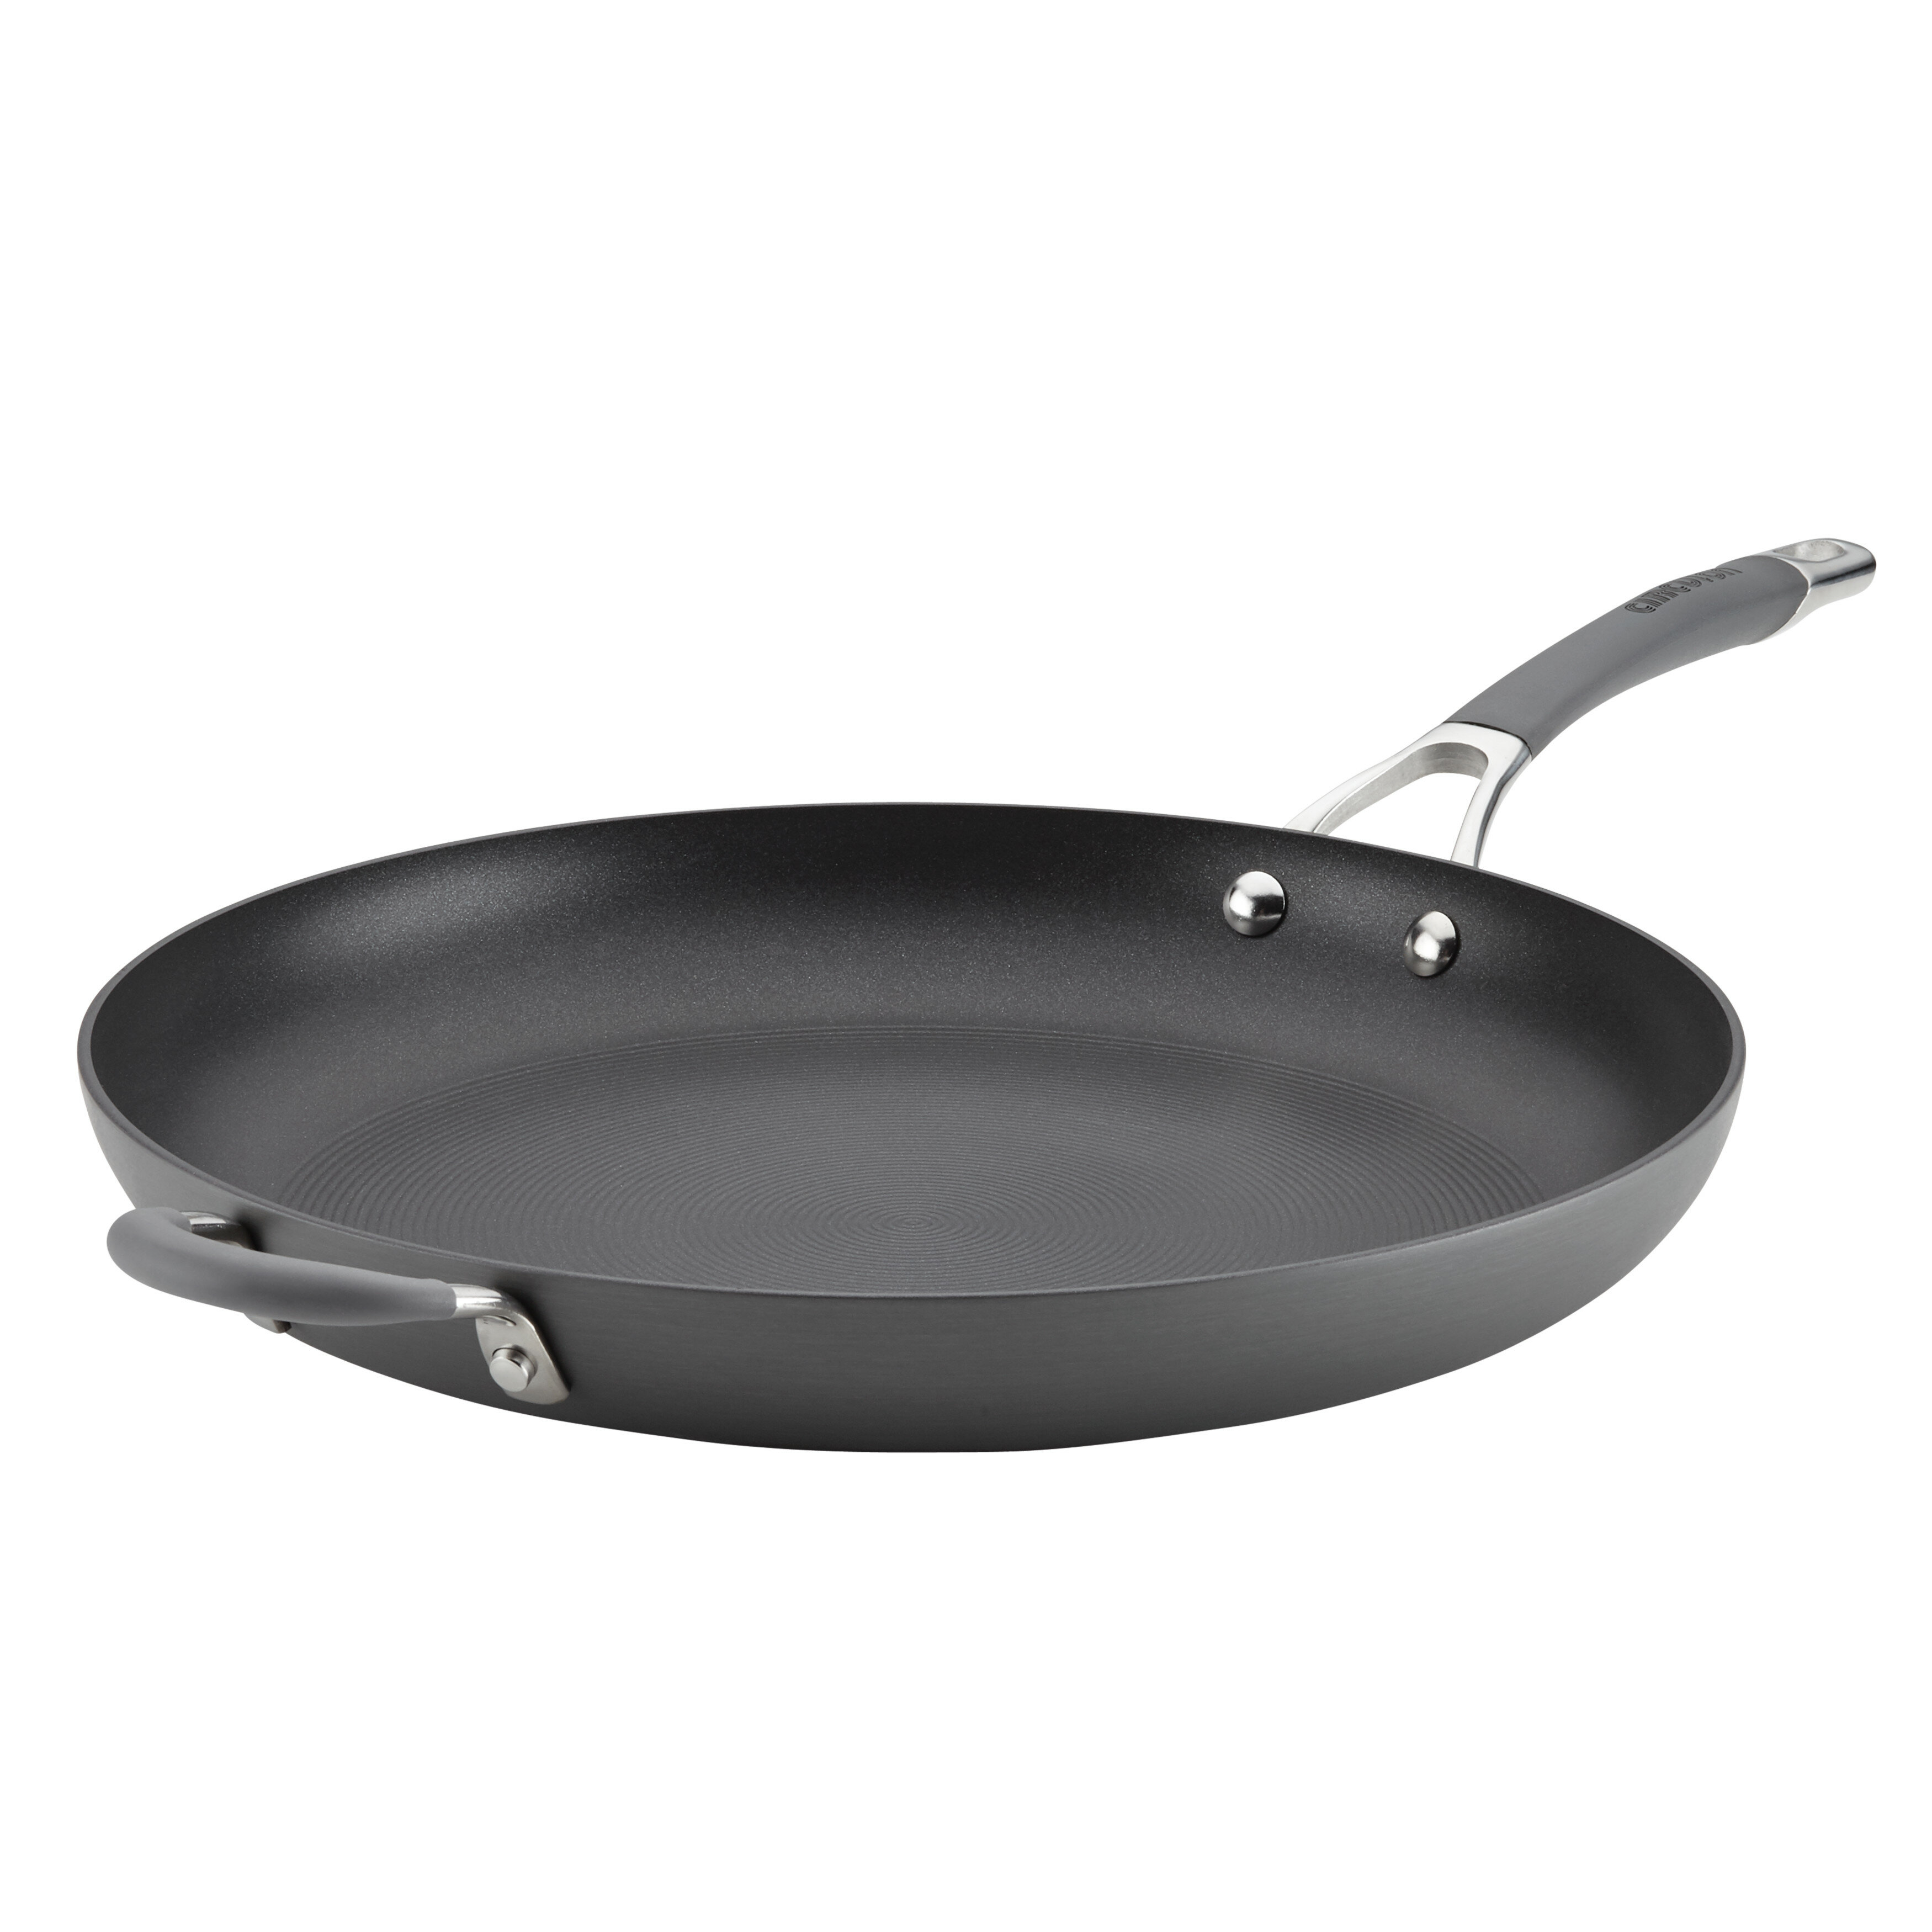 Circulon Radiance Hard Anodized Nonstick Frying Pan / Skillet with